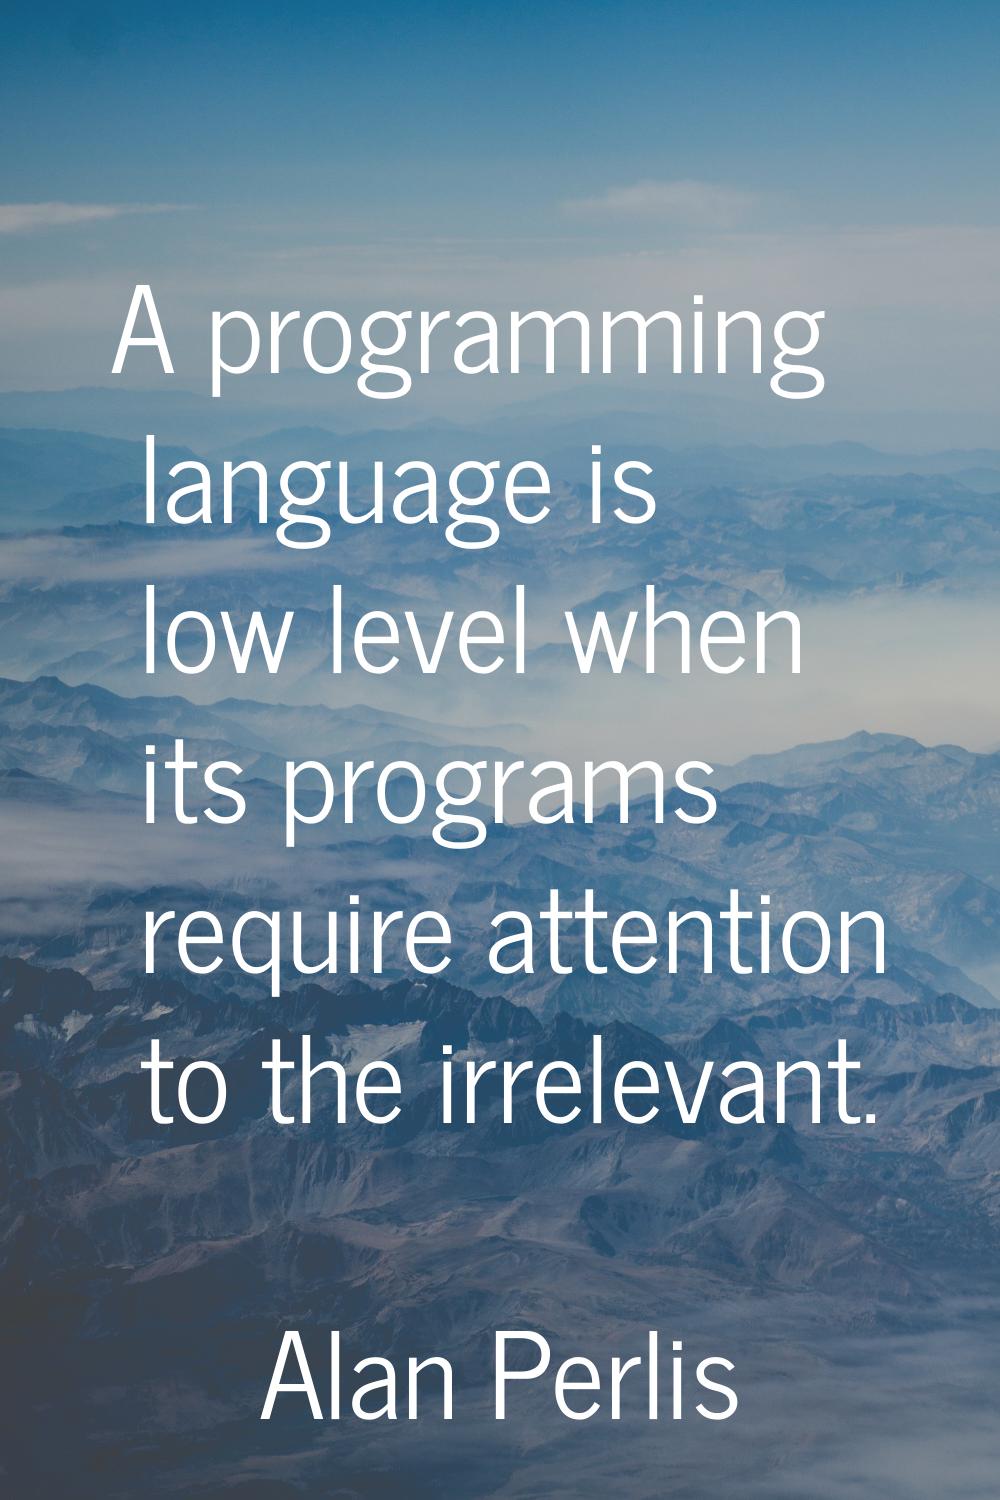 A programming language is low level when its programs require attention to the irrelevant.